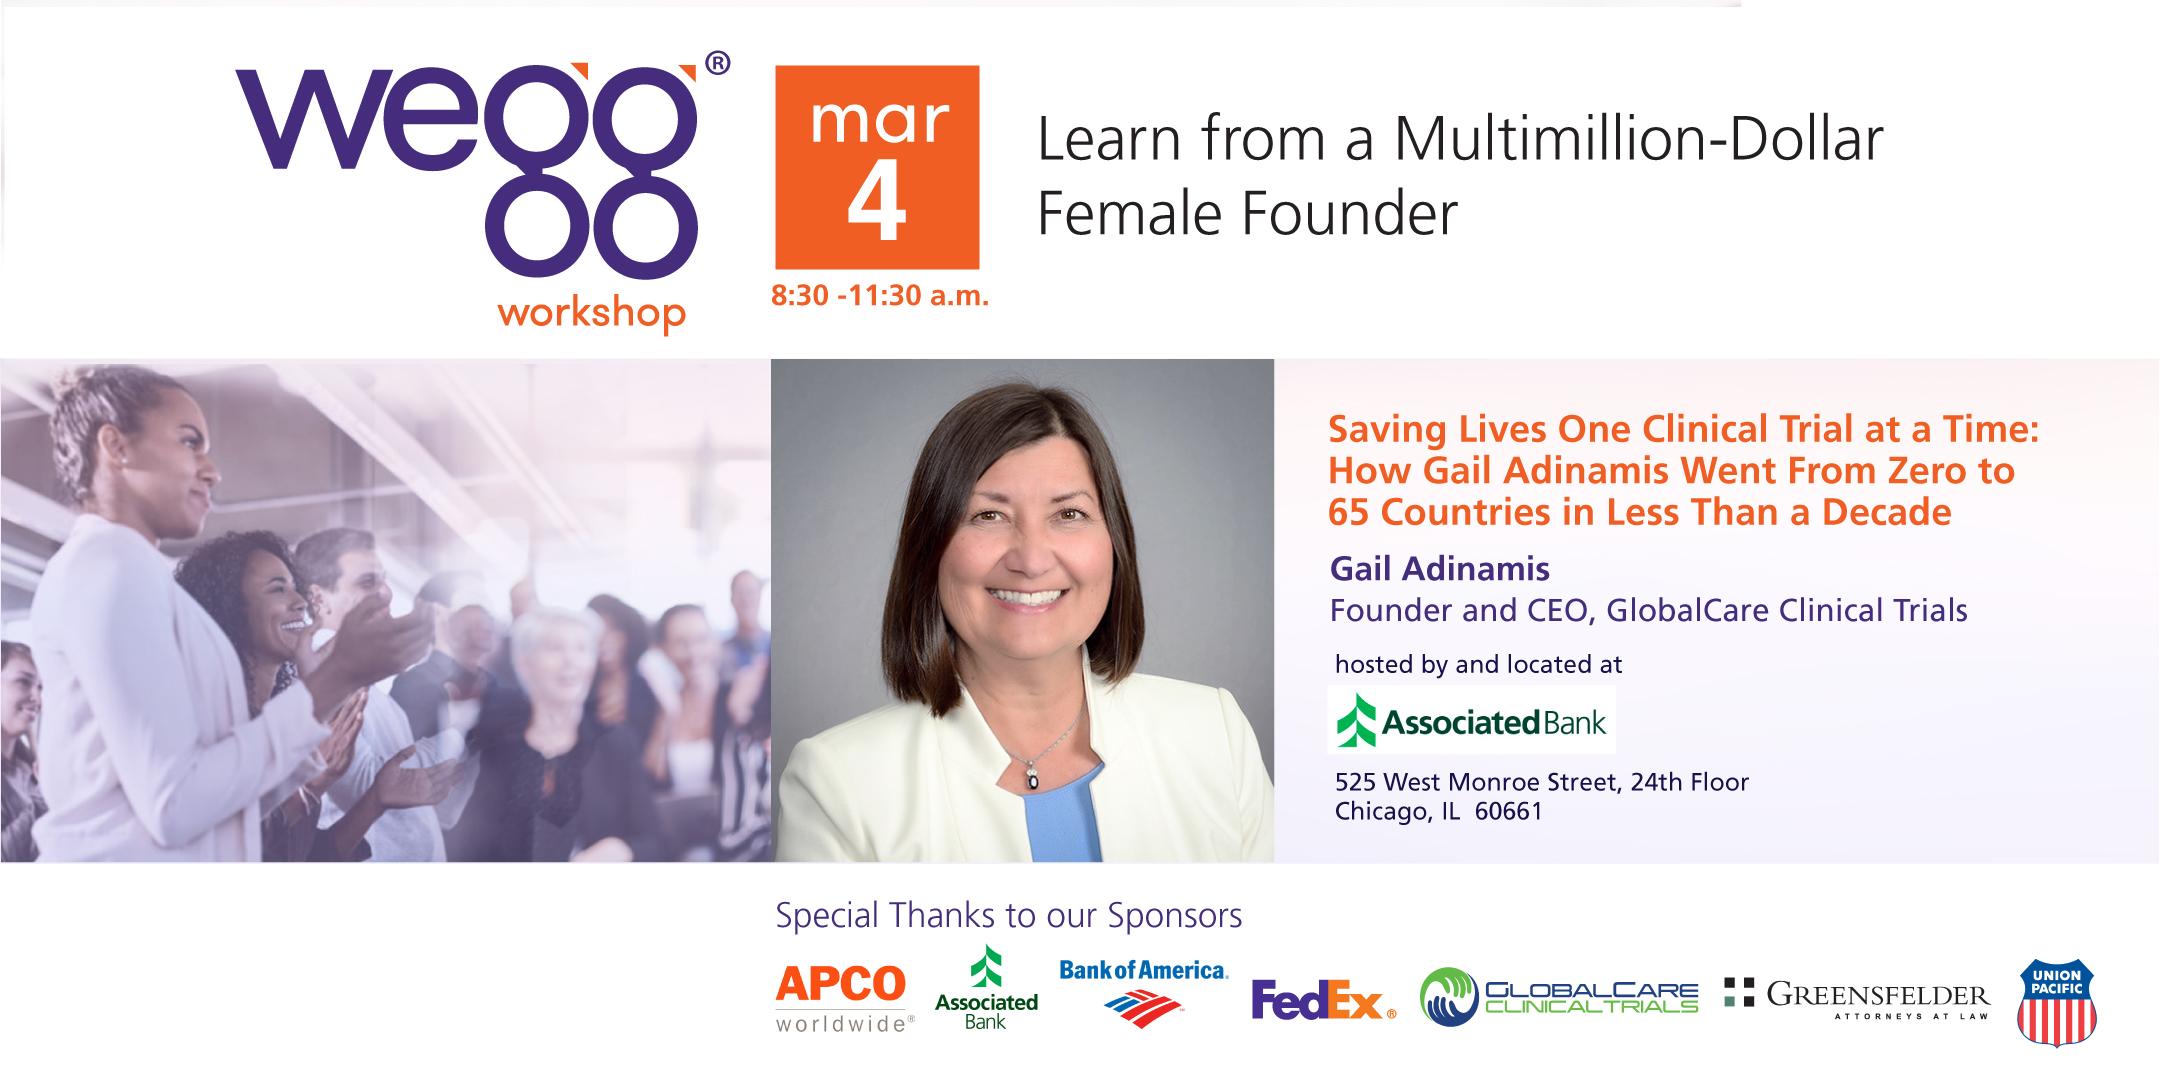 wegg® workshop - Saving Lives One Clinical Trial at a Time: How Gail Adinamis Went From Zero to 65 Countries in Less Than a Decade